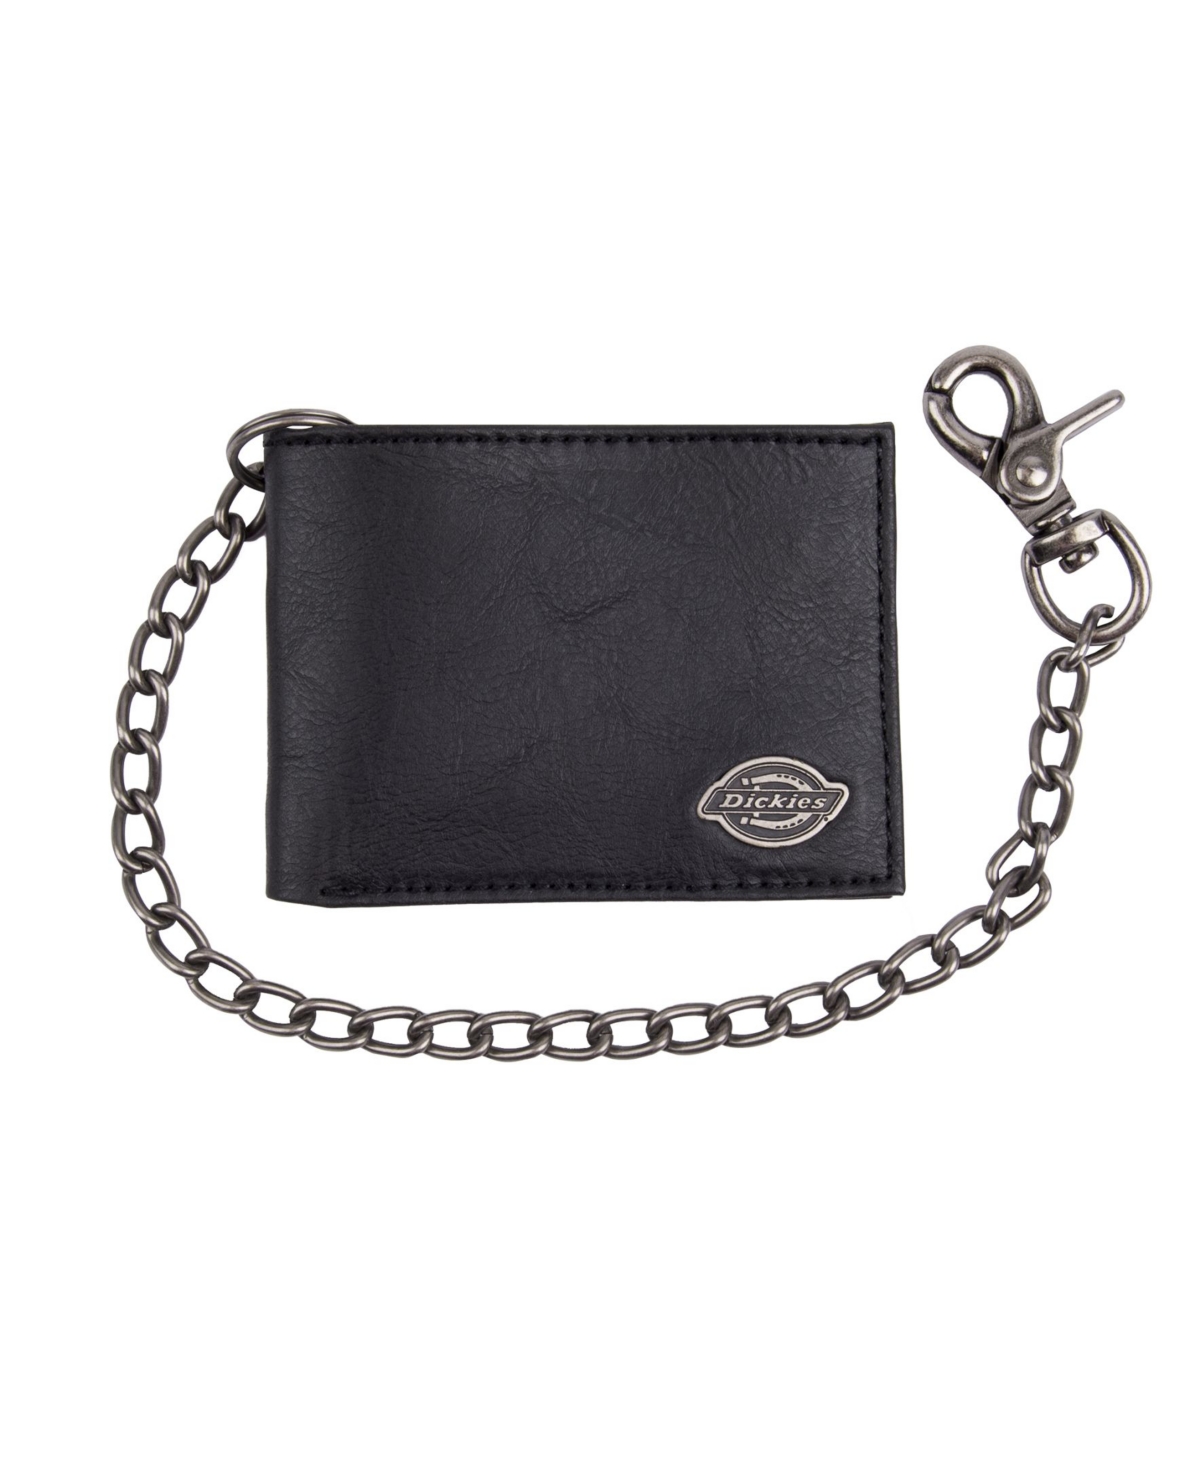 Security Leather Slimfold Men's Wallet with Chain - Brown